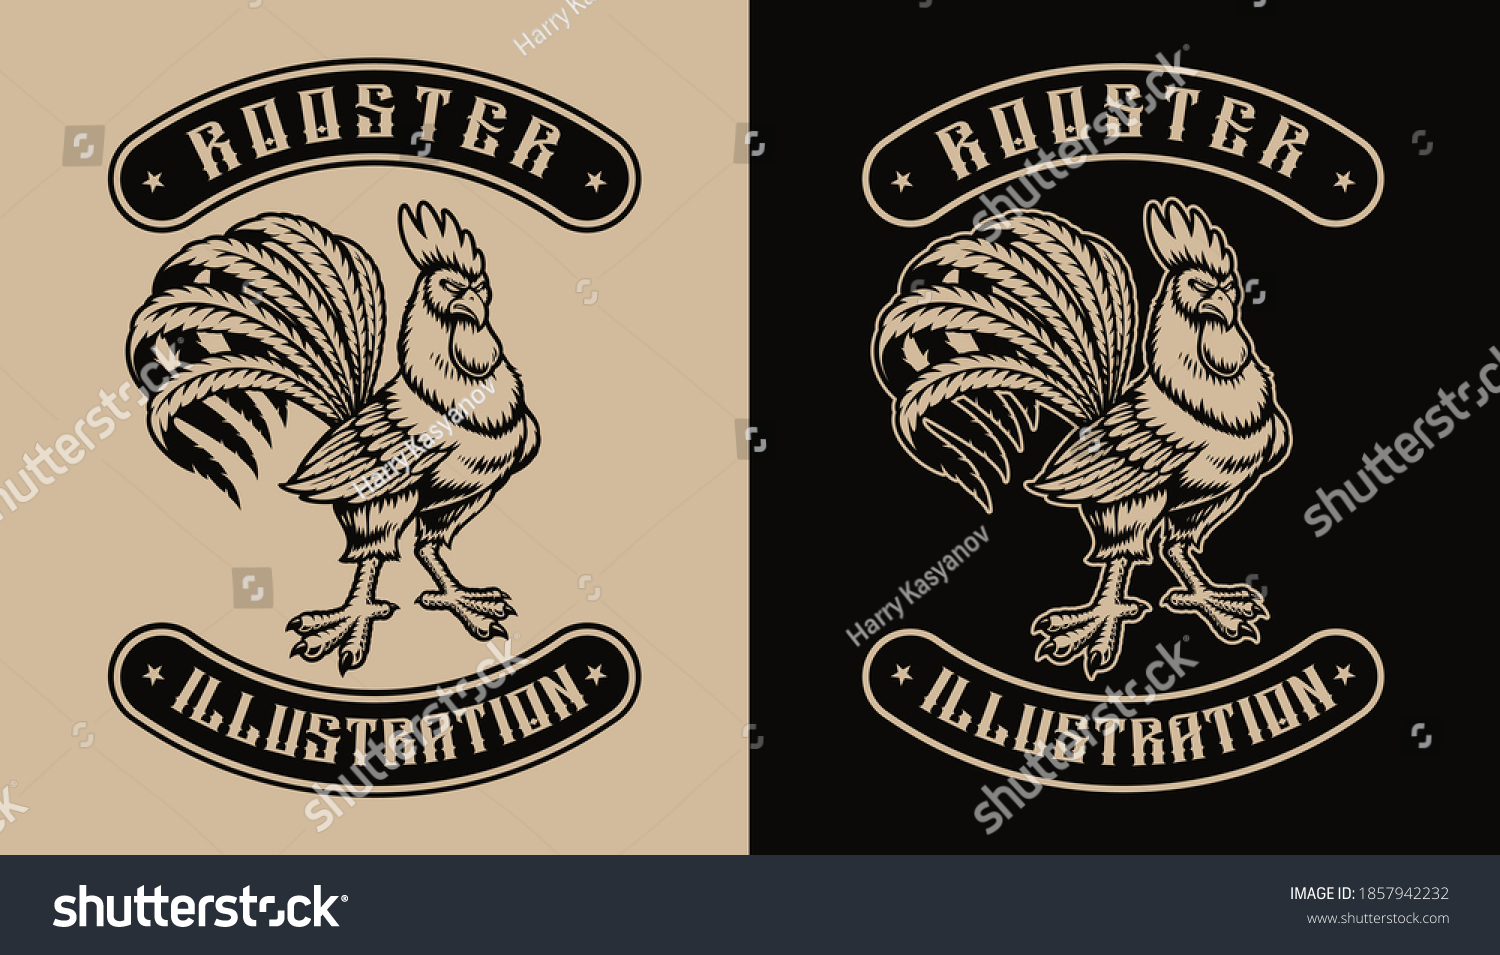 Stock Vector A Black And White Illustration Of A Rooster That Design Can Be Used As Shirt Print As Well As For 1857942232 